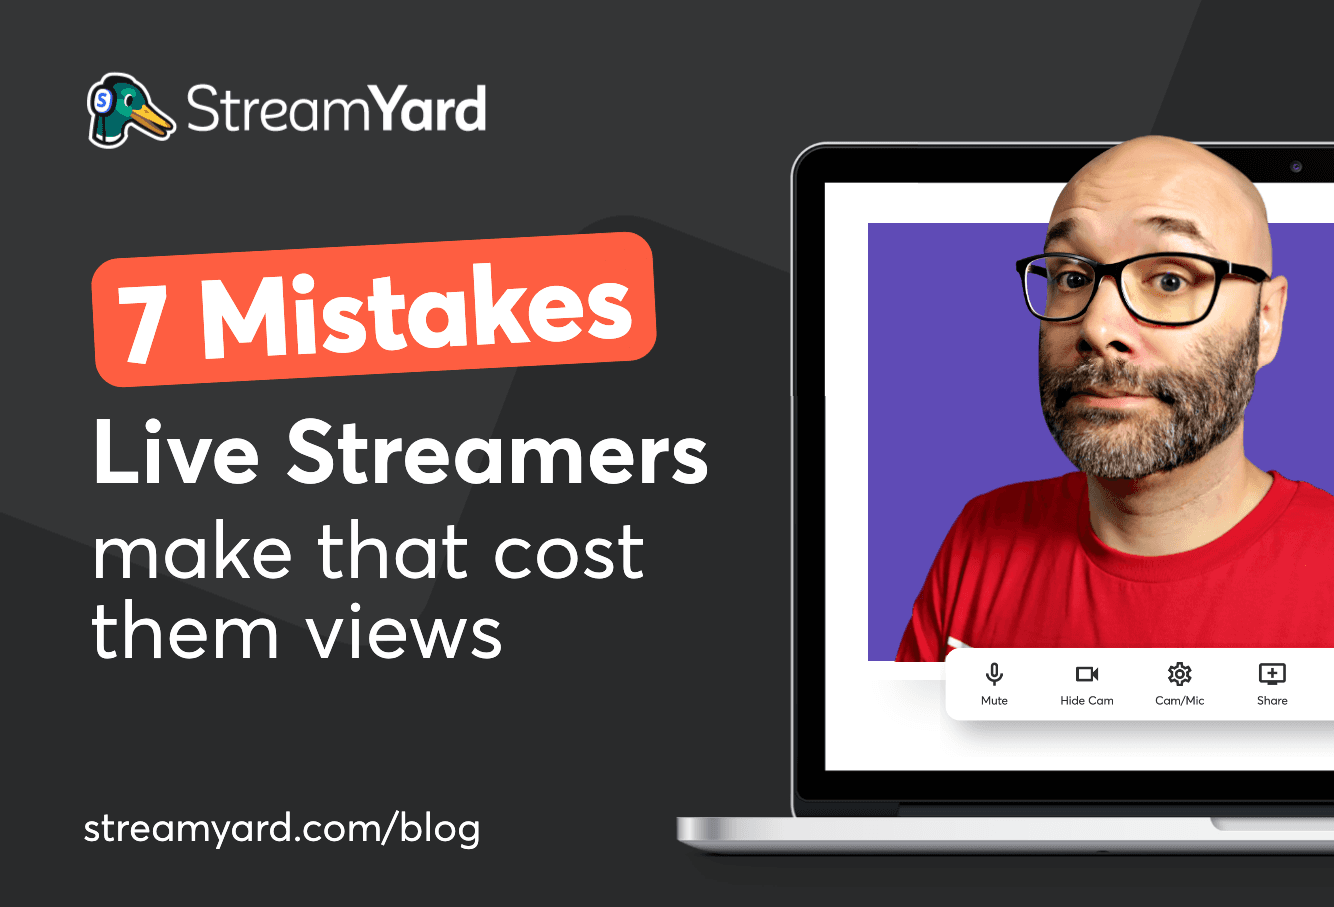 Do you go live on YouTube often but don’t get the views your content deserves? Avoid these YouTube live streaming mistakes that can cost you views.